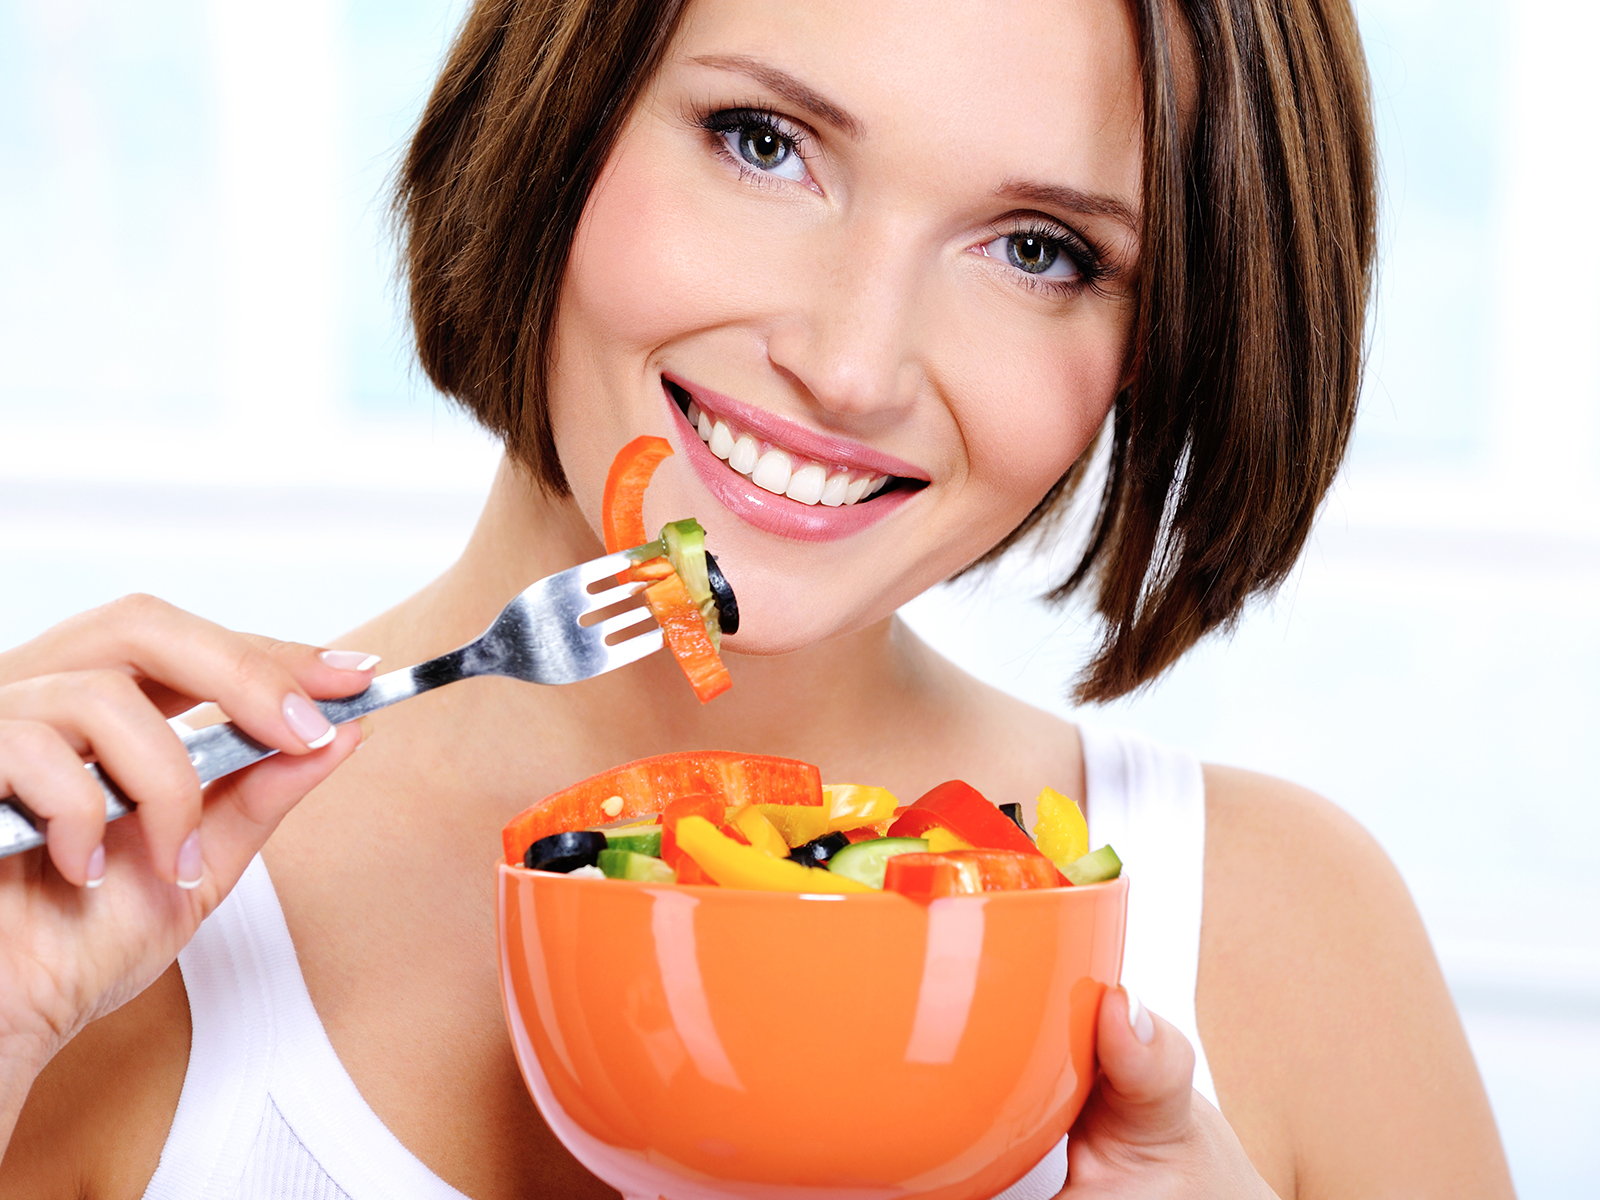 Do You Know Your Diet Affects Oral Health